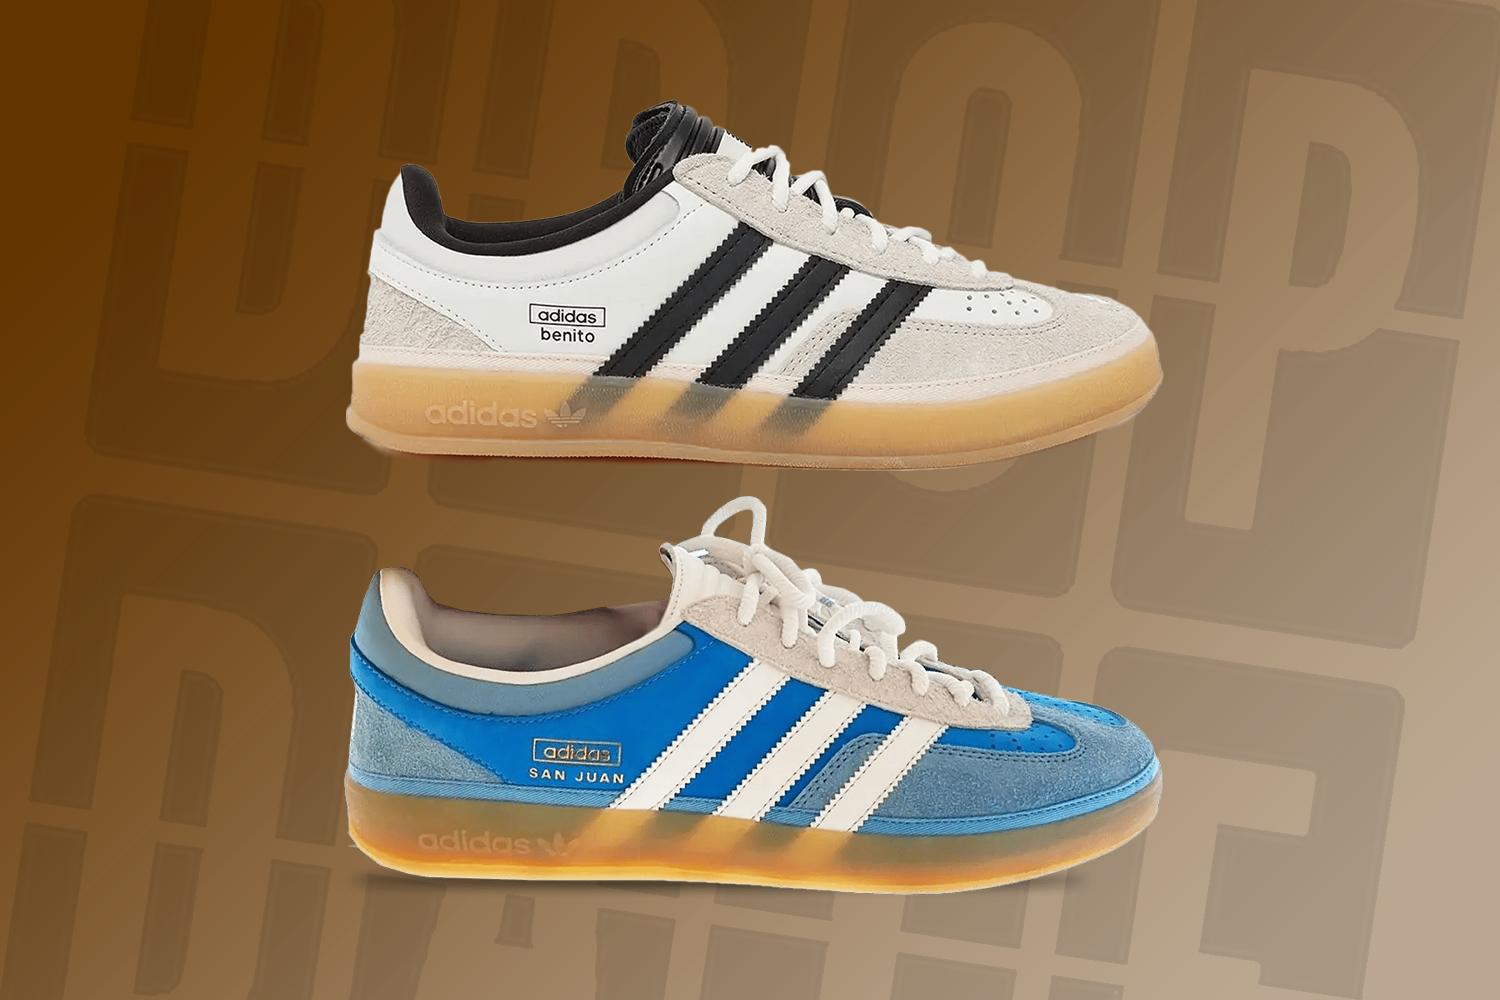 Bad Bunny Puts His Spin on the adidas Gazelle Indoor